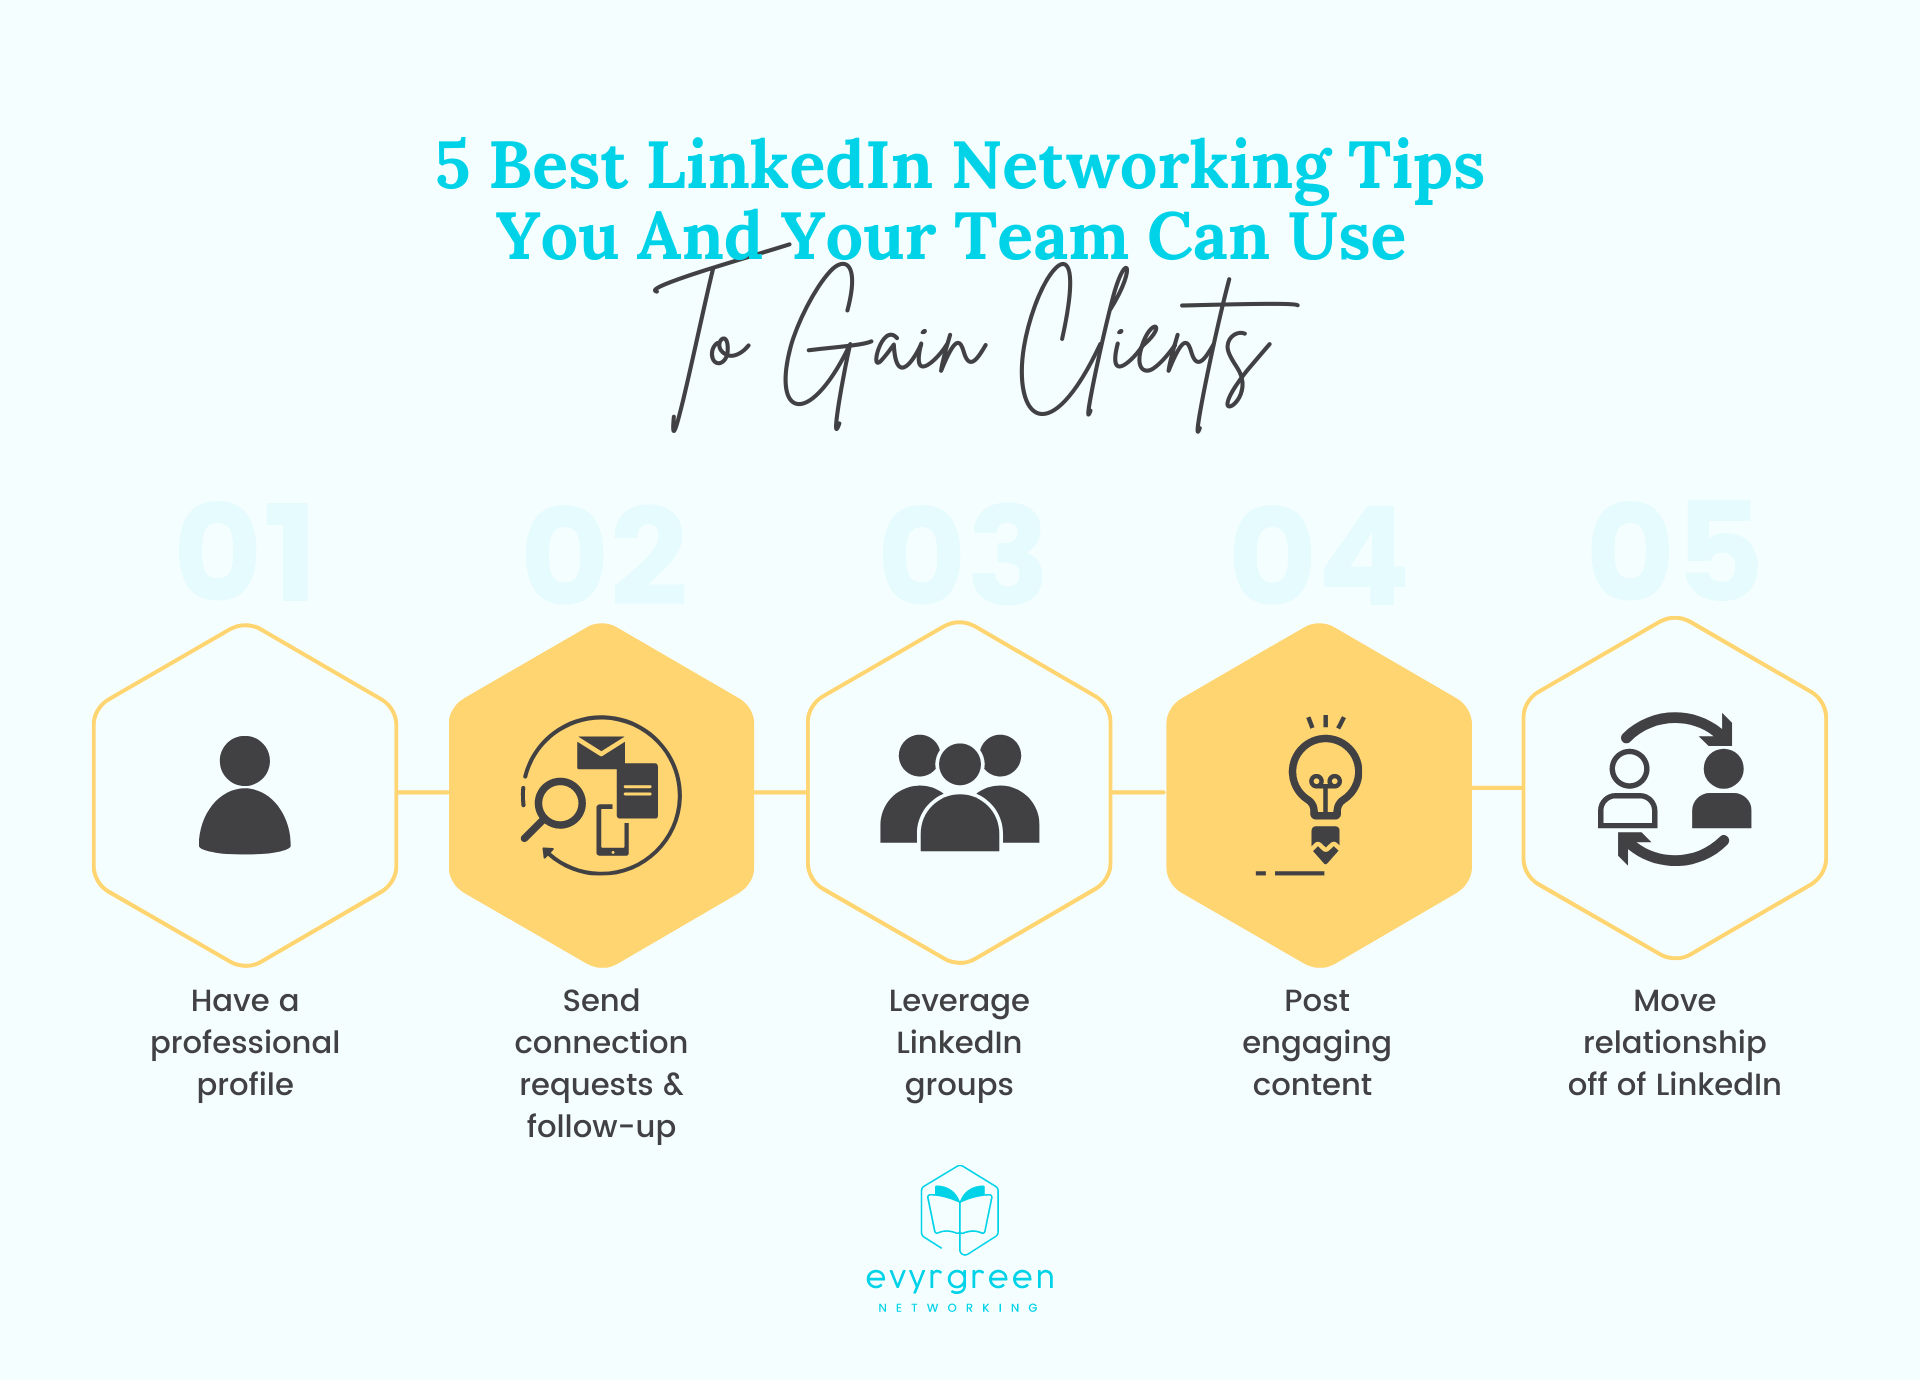 5 Best LinkedIn Networking Tips You And Your Team Can Use To Gain Clients 2